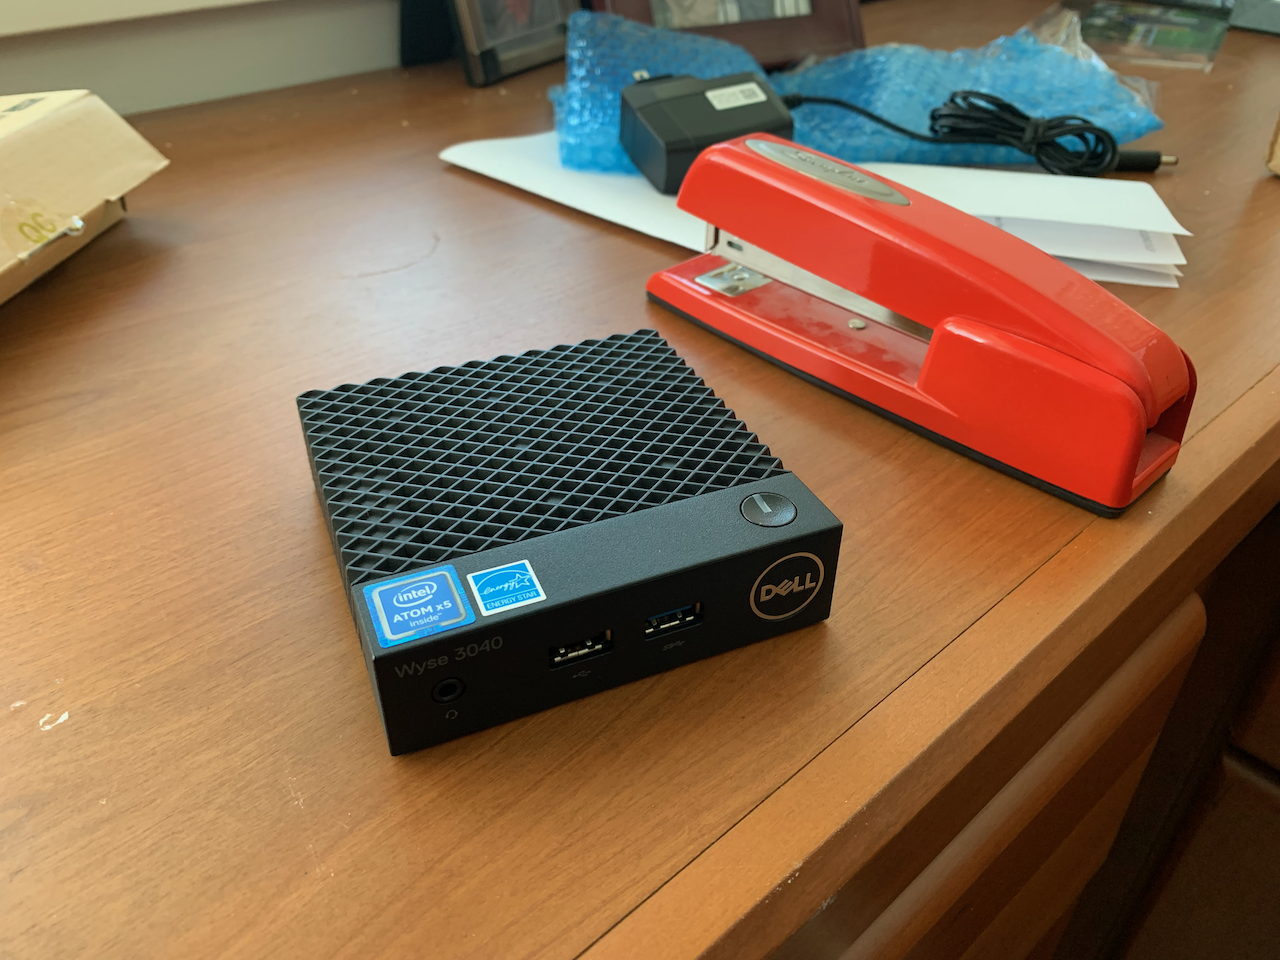 Dell Wyse 3040 thin client sitting on a desk with a red Swingline stapler for scale